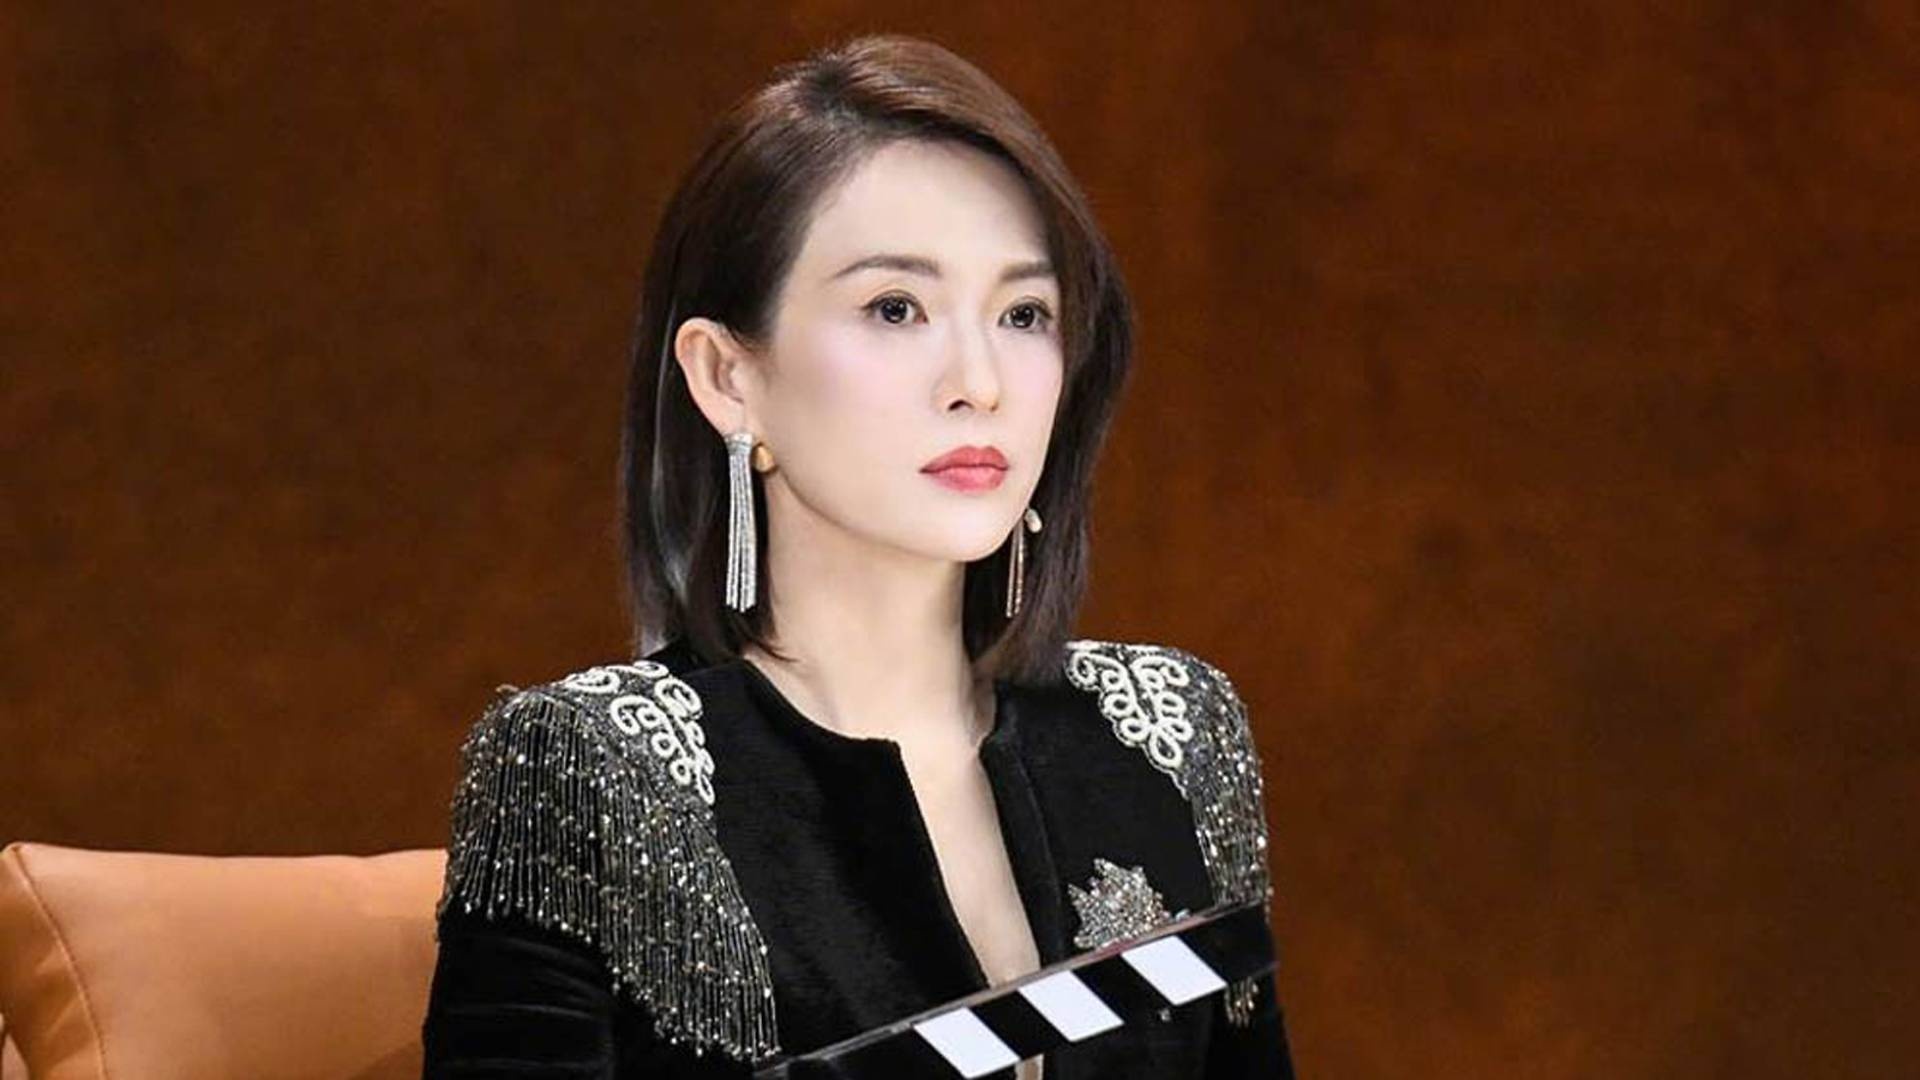 Zhang Ziyi, Fiery temperament, Acting competition judge, Strong opinions, 1920x1080 Full HD Desktop